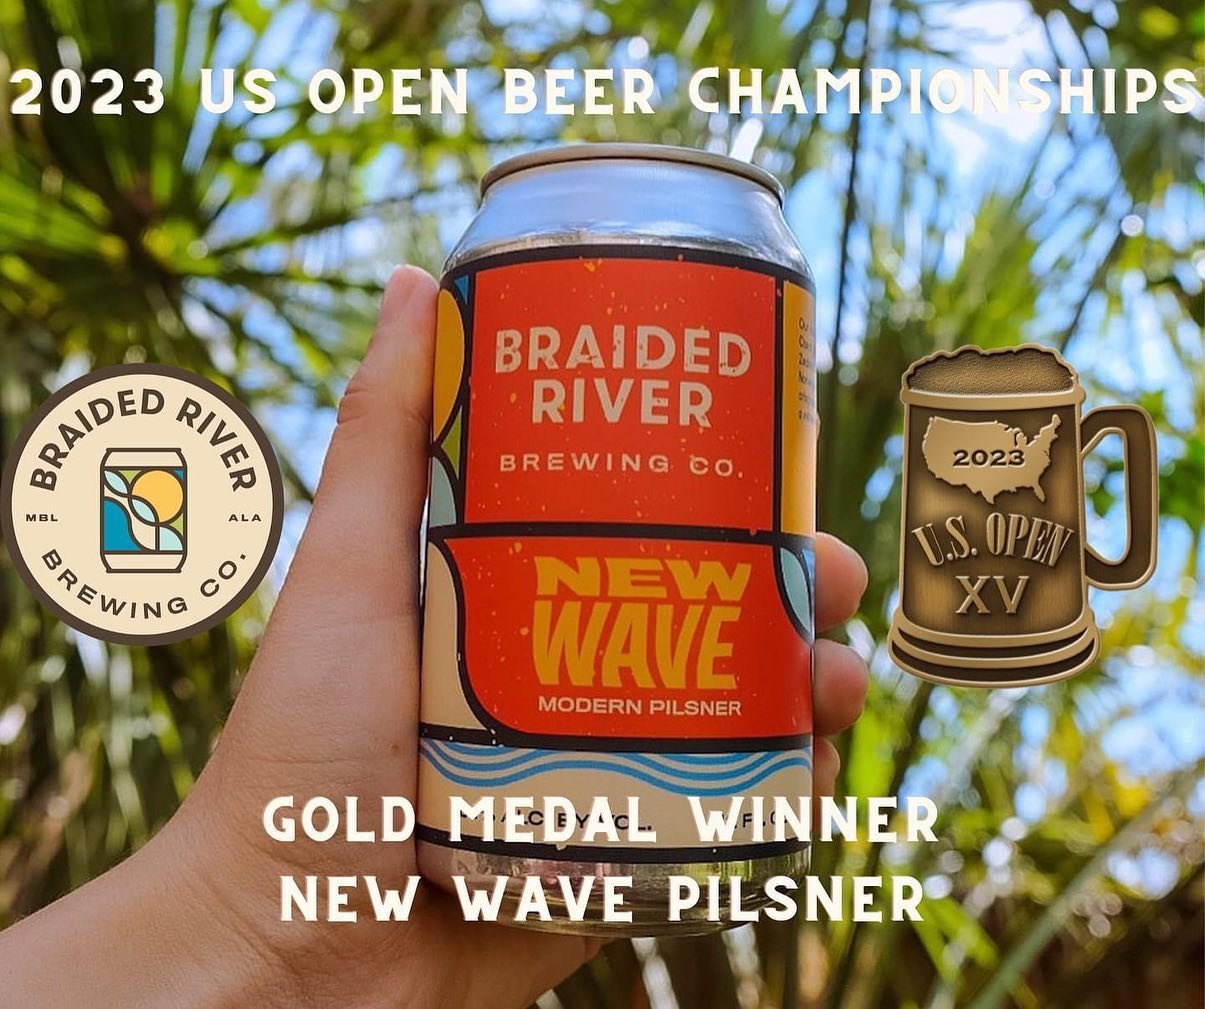 Join us today as our US Beer Open gold medal winner returns! New Wave Modern Pilsner is BACK! 

We&rsquo;ll also have food from Cousins Maine Lobster Food Truck! 

🔜 Doors open at 2:30!
🦞 Lobster truck at 3:30!
🍻 Happy Hour til 6!